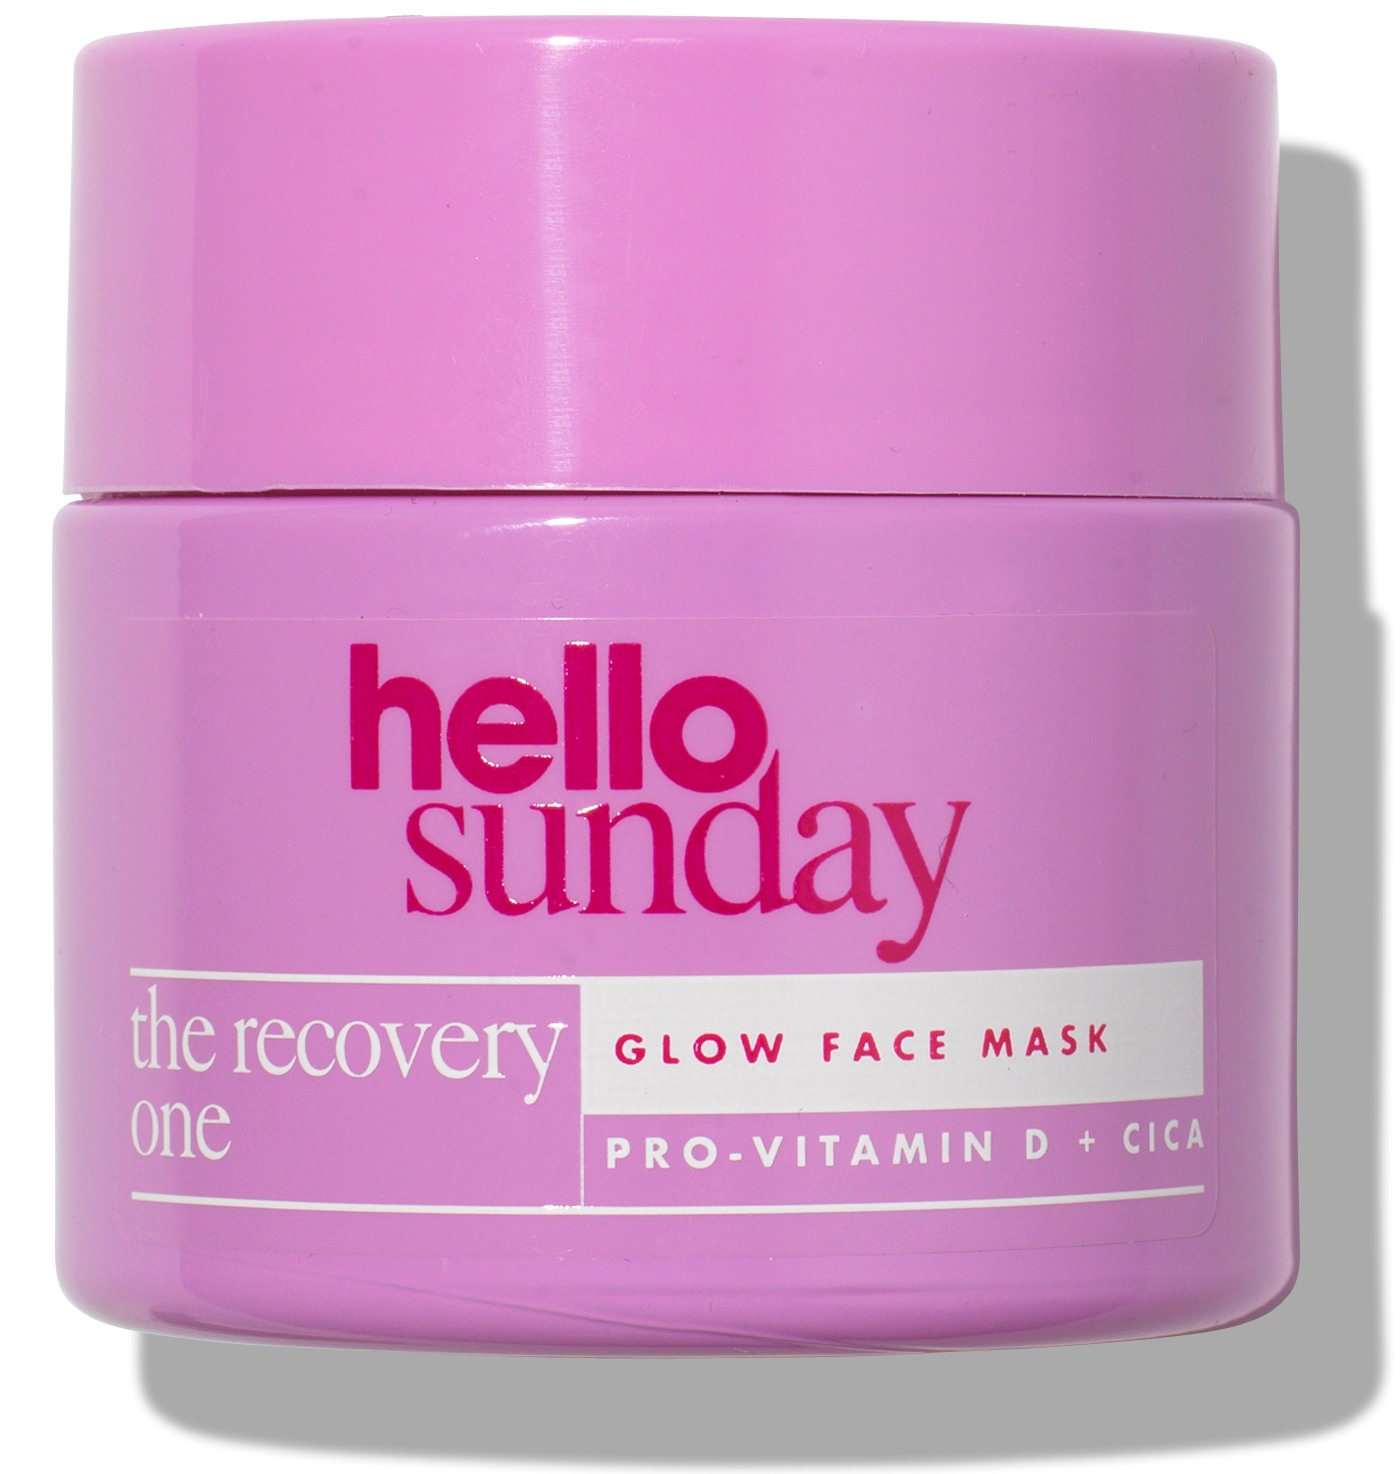 Hello Sunday The Recovery One - Glow Face Mask